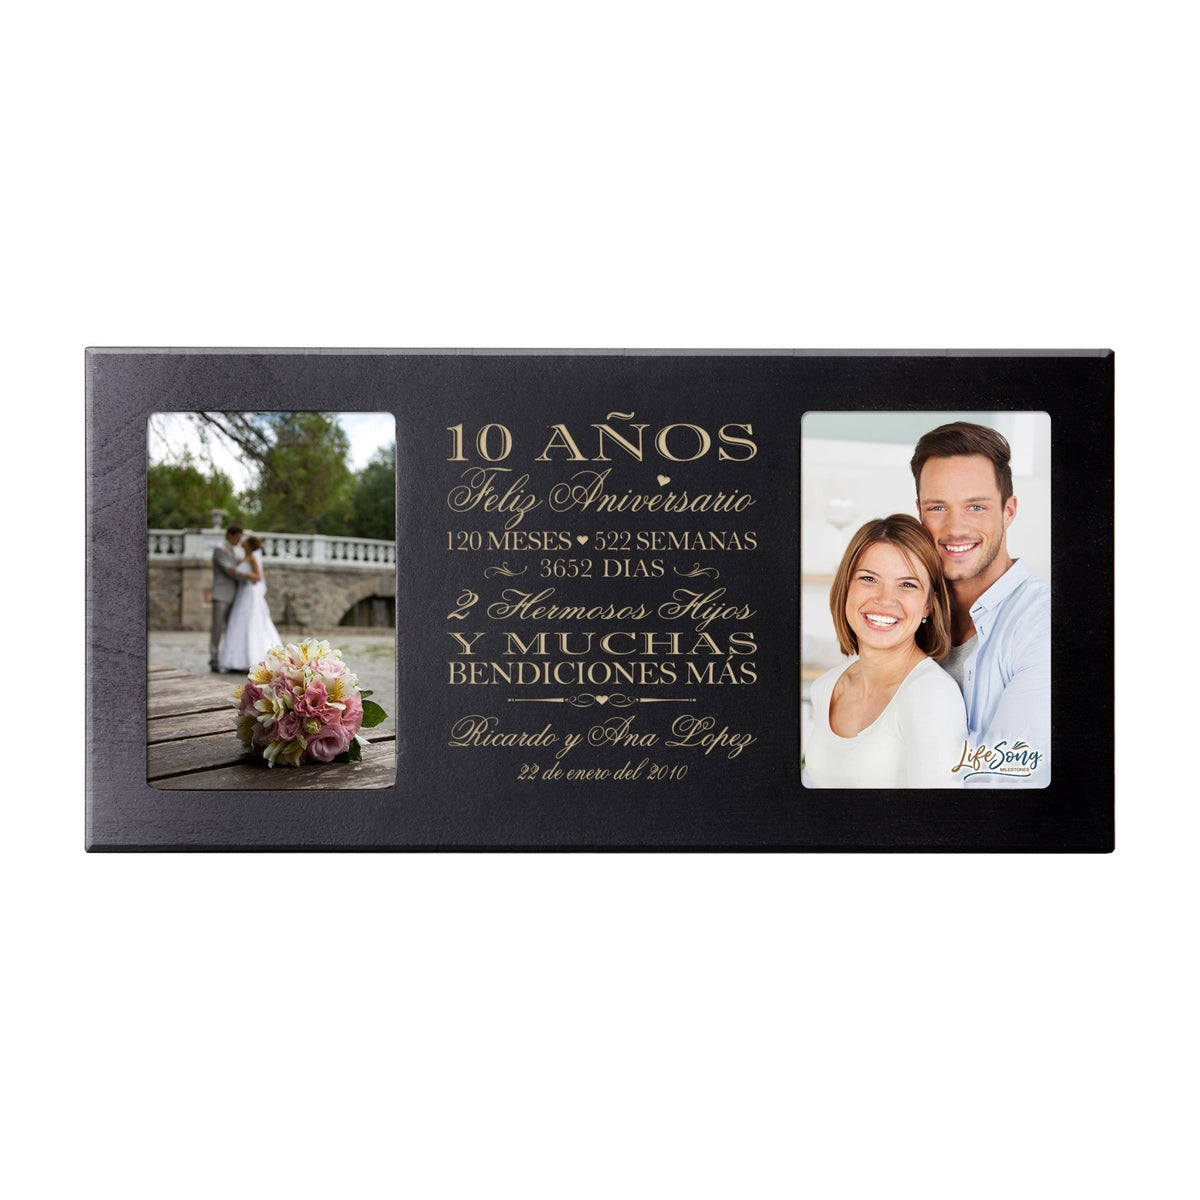 Lifesong Milestones Personalized Couples 10th Wedding Anniversary Spanish Picture Frame